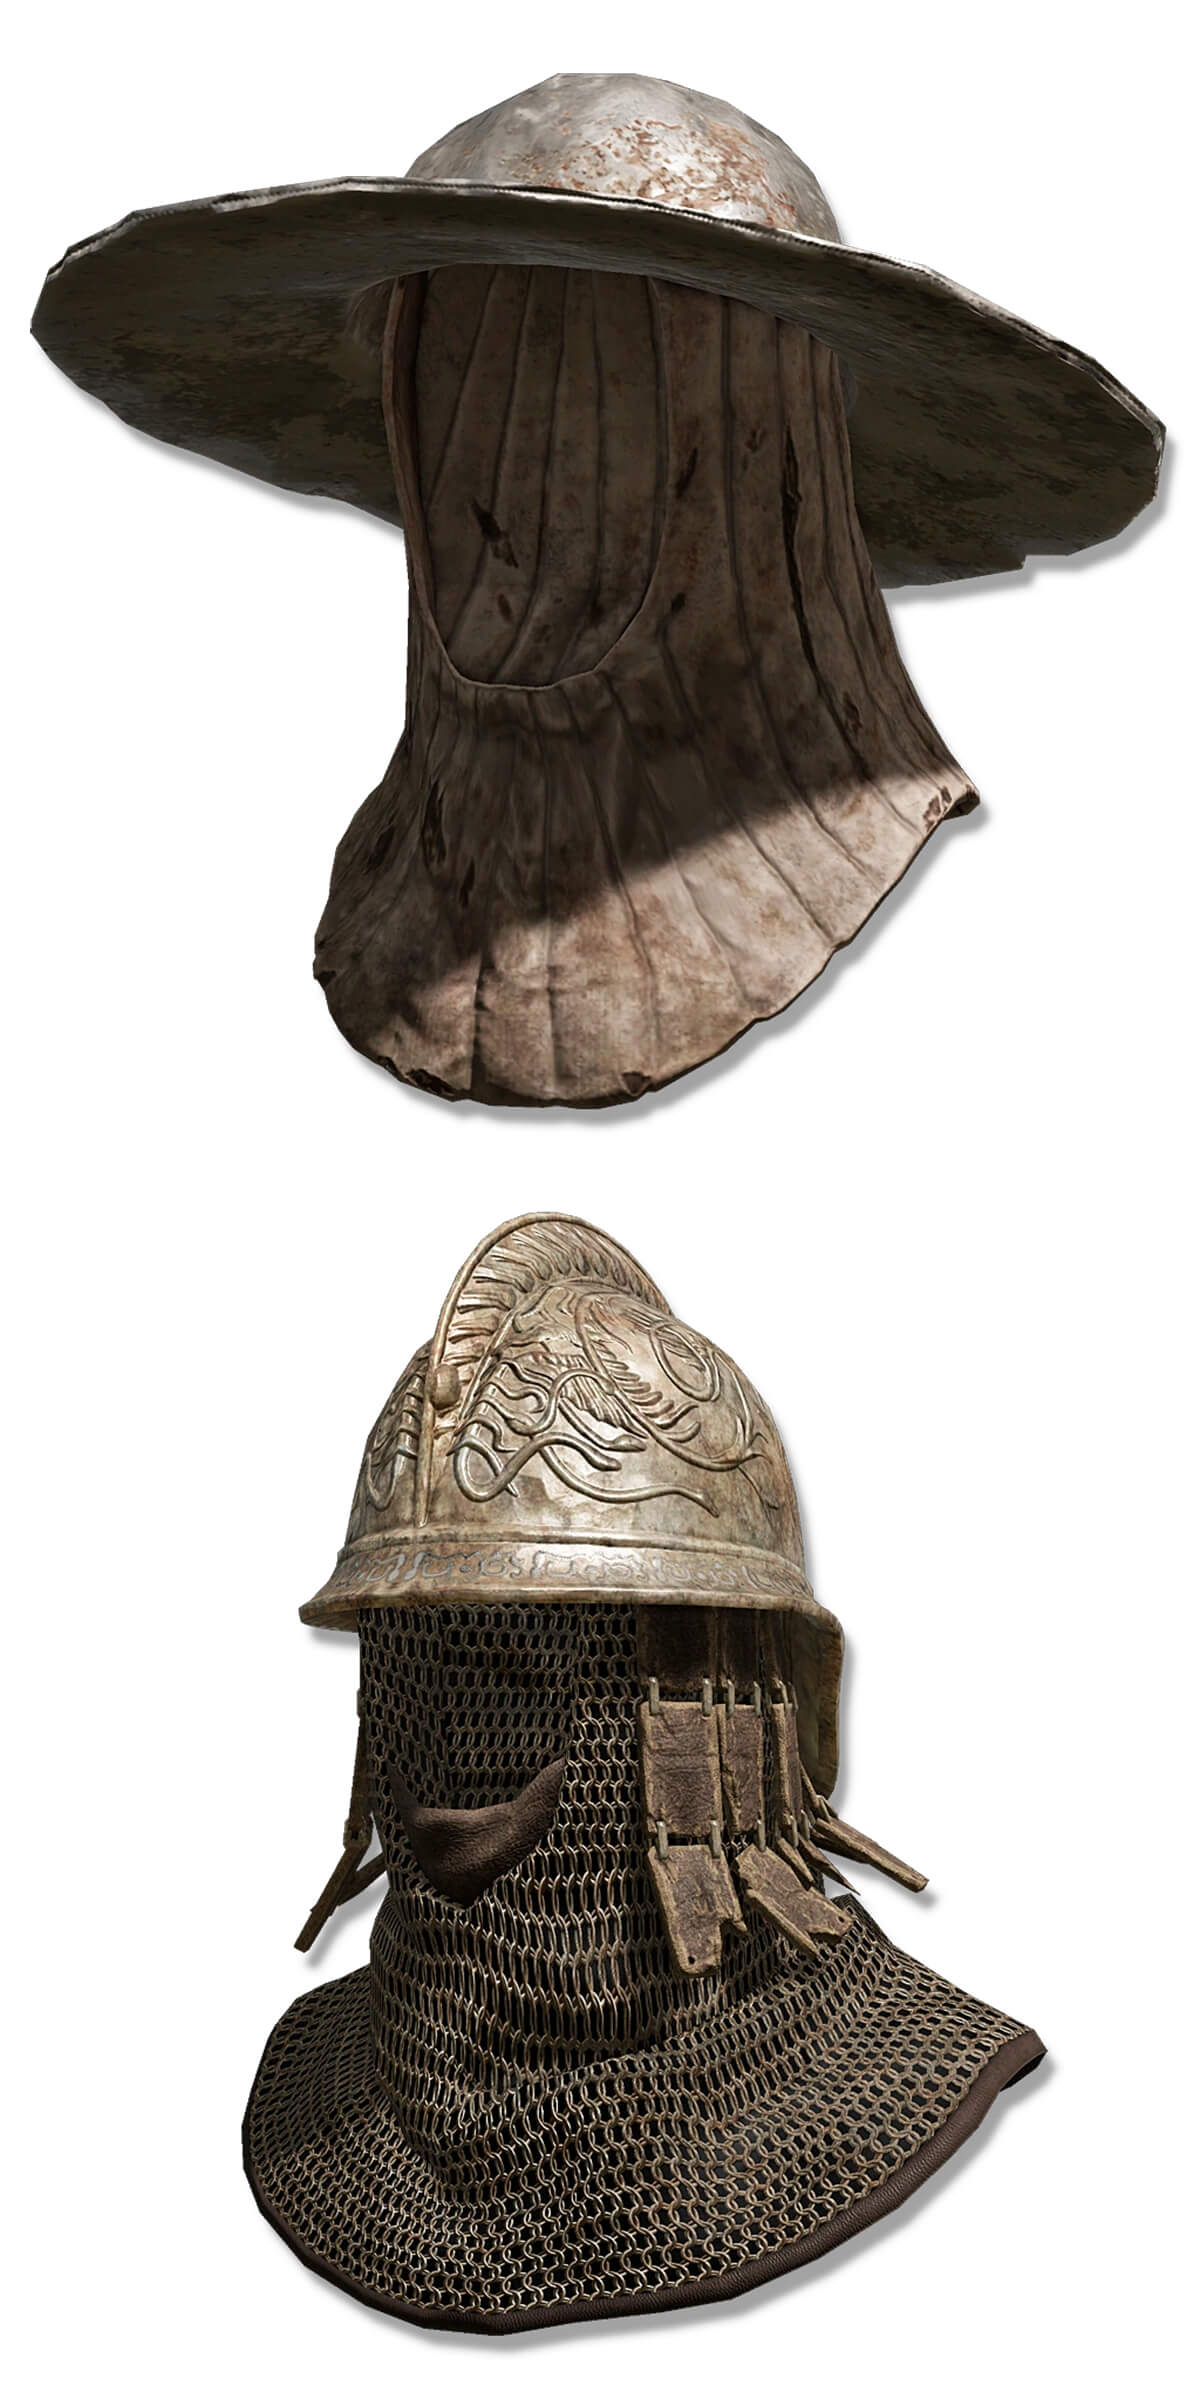 Elden Ring item renders of a large brimmed iron hat, and an ornate helmet on a chainmail hood.